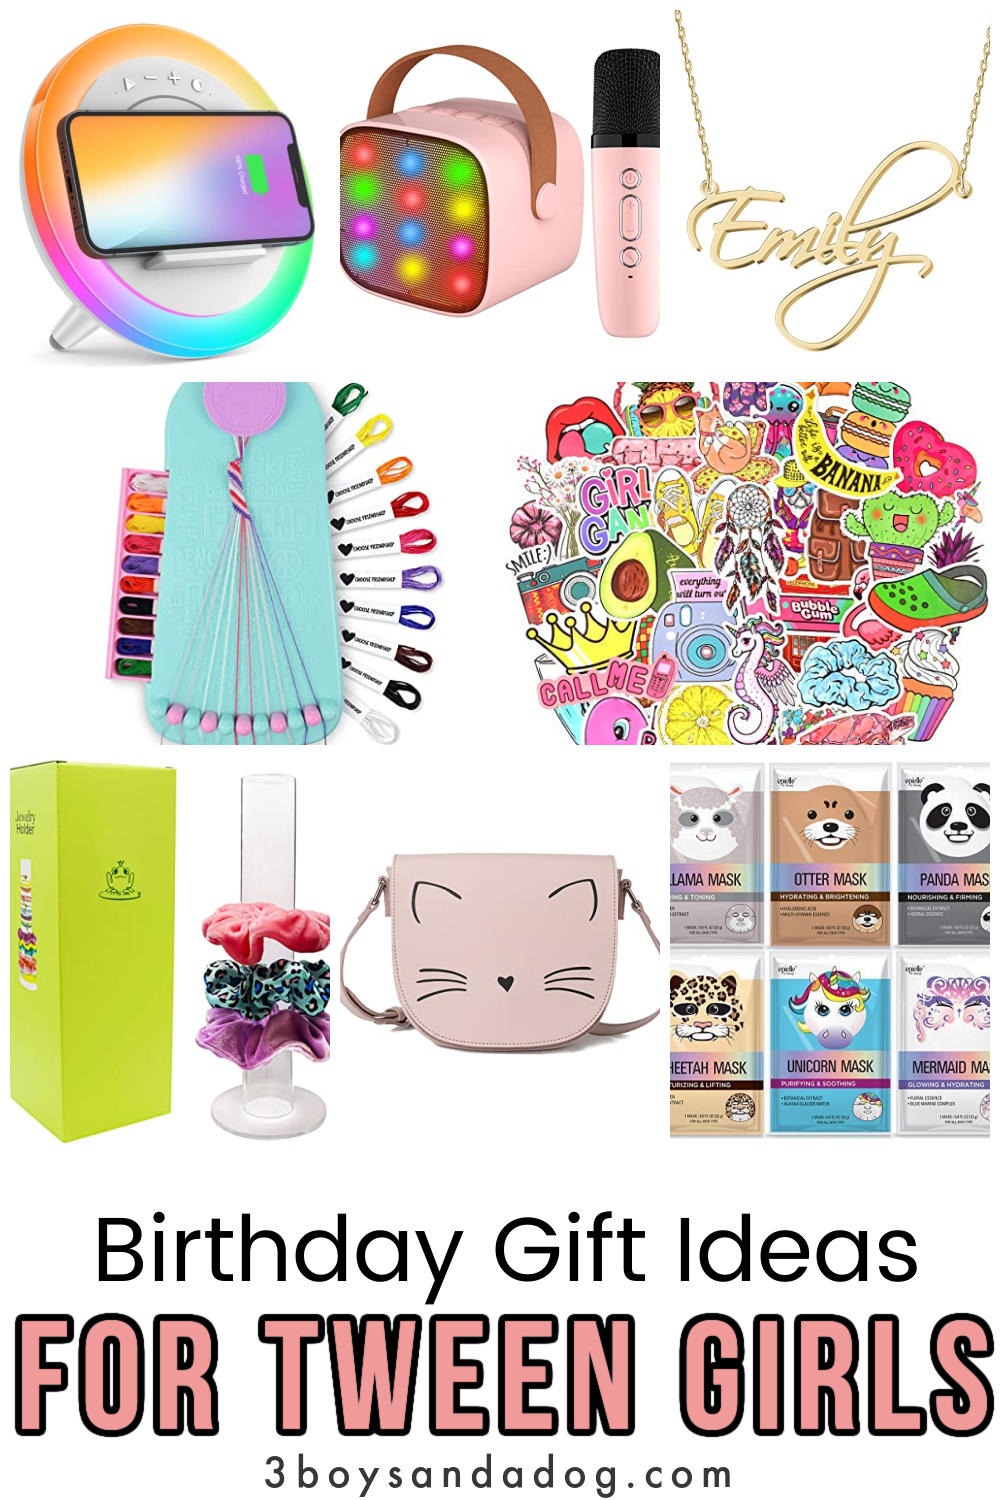 20 Birthday Gift Ideas for Tween Girls - 3 Boys and a Dog